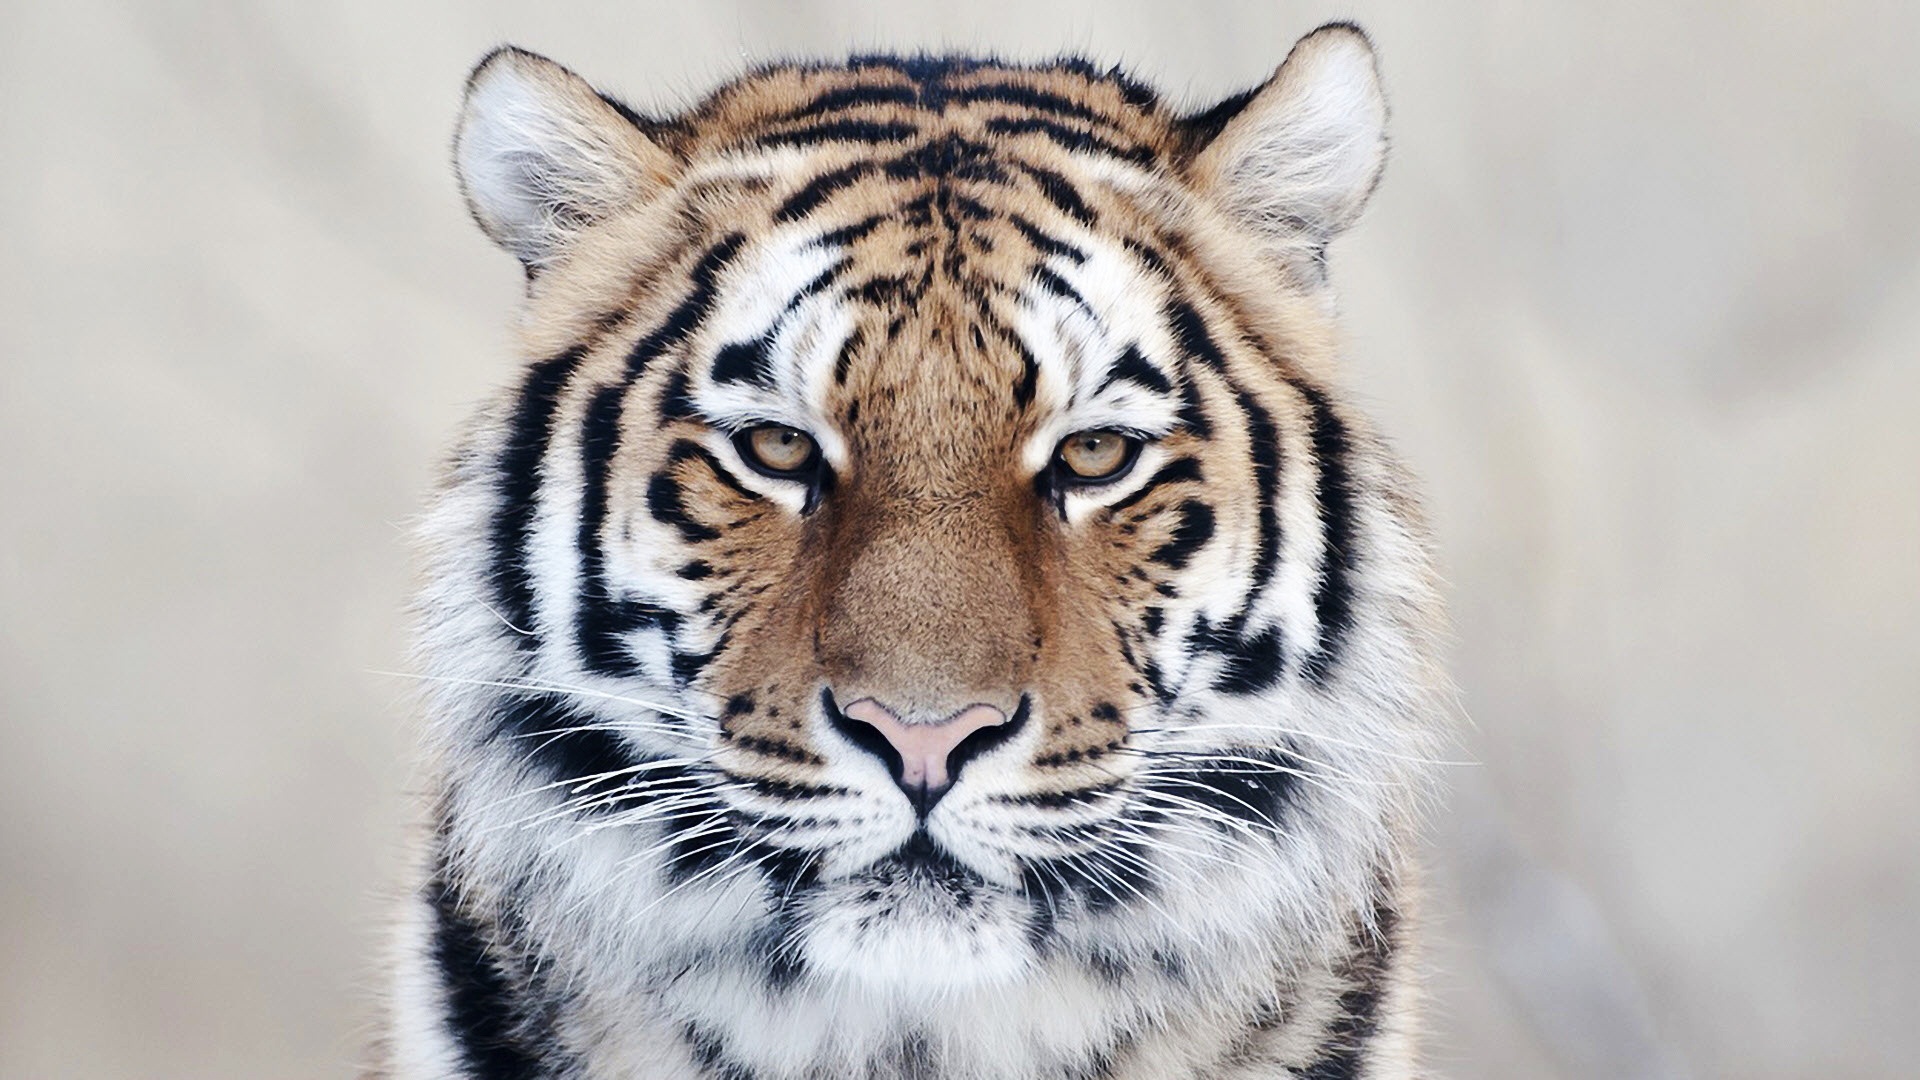 Tiger Close Up Wallpapers HD Wallpapers 1920x1080